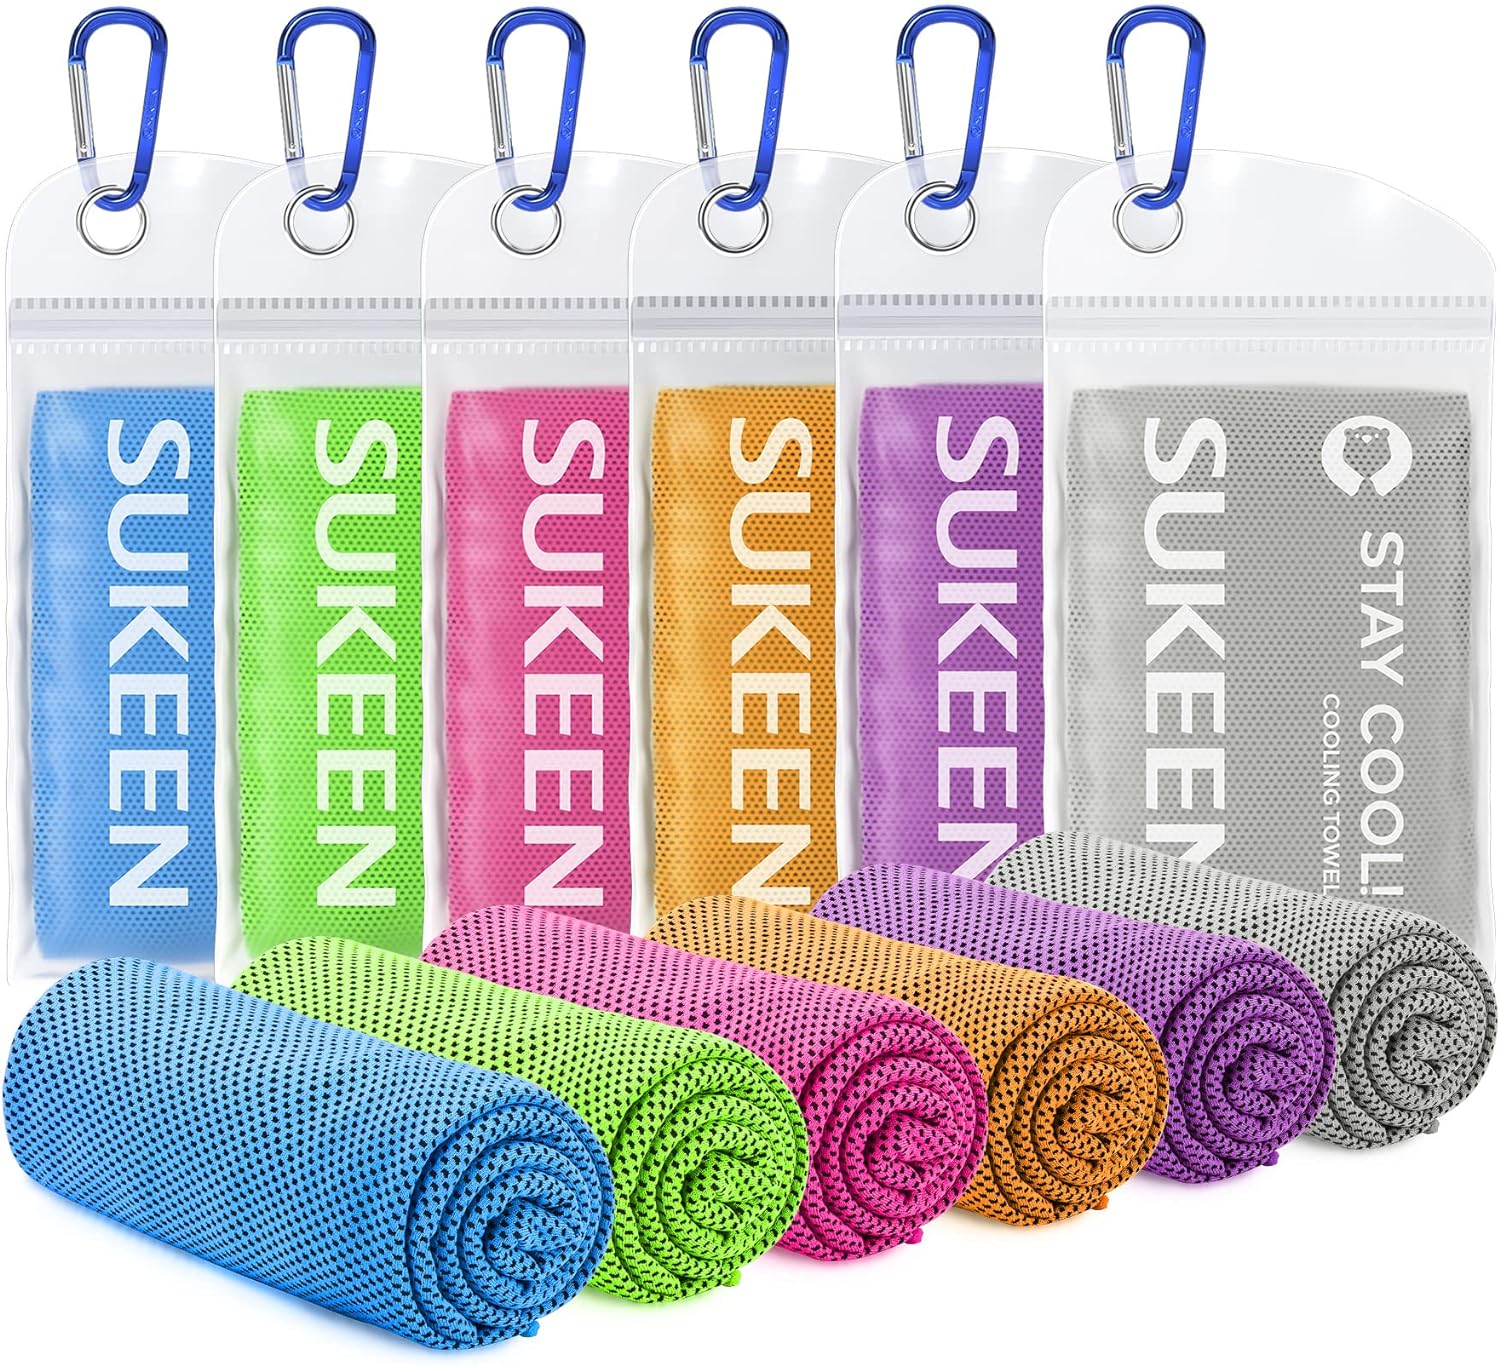 [6 Pack] Sukeen Cooling Towel (40"x12") Bulk Ice Towel,Soft Breathable Chilly Towel,Microfiber Towel (Multicolor-4)